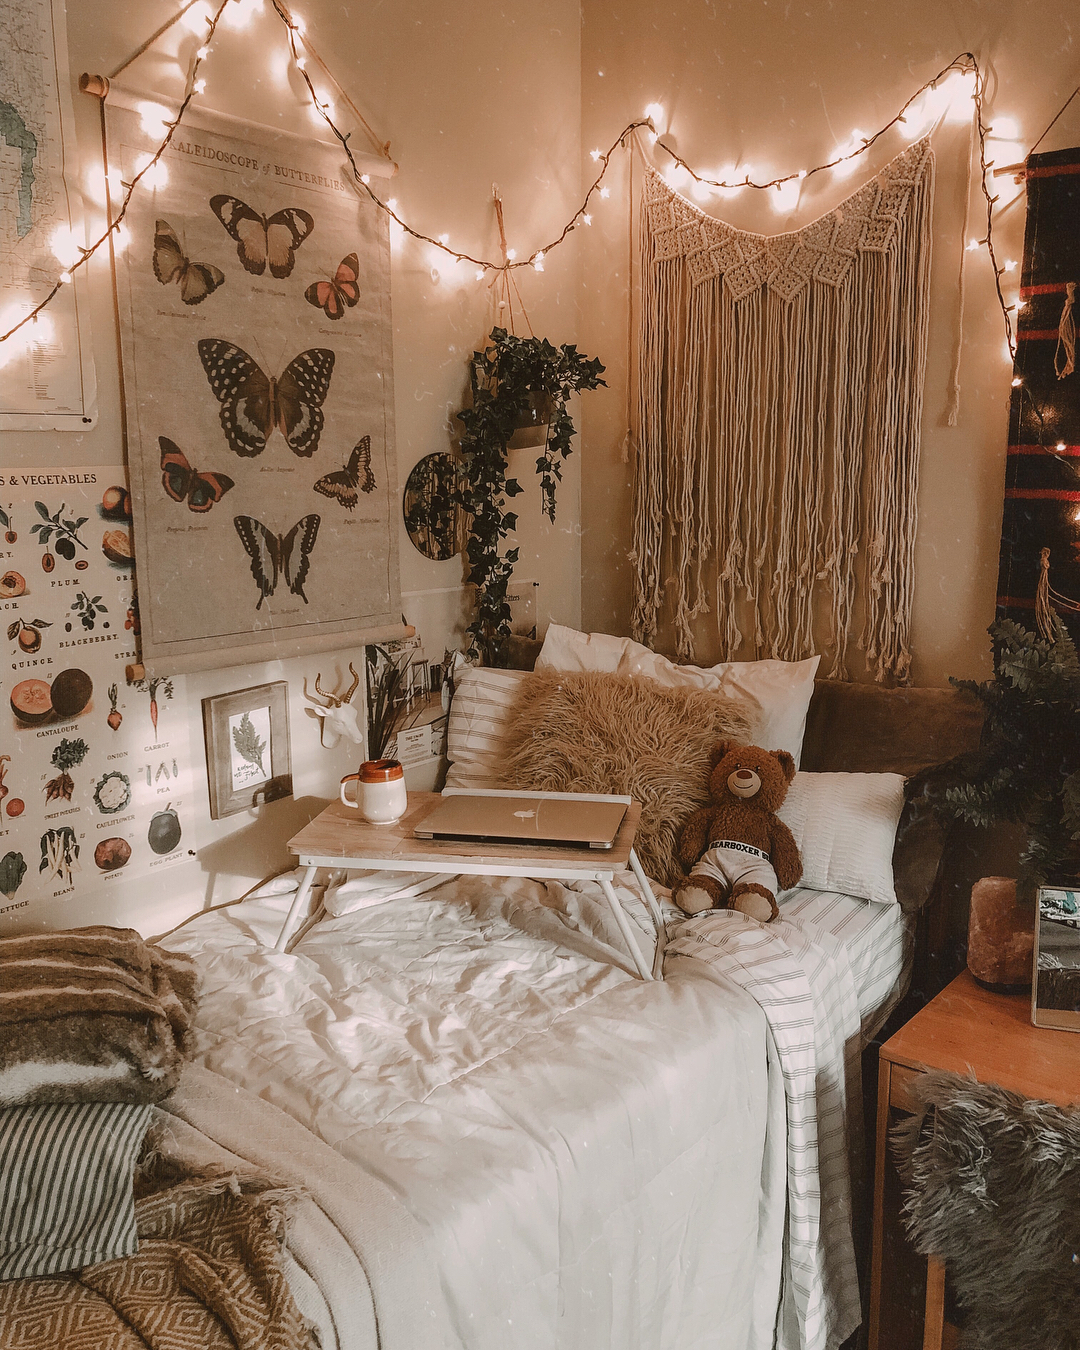 6 Ways to Add a Chill Vibe to Your Room - Society19